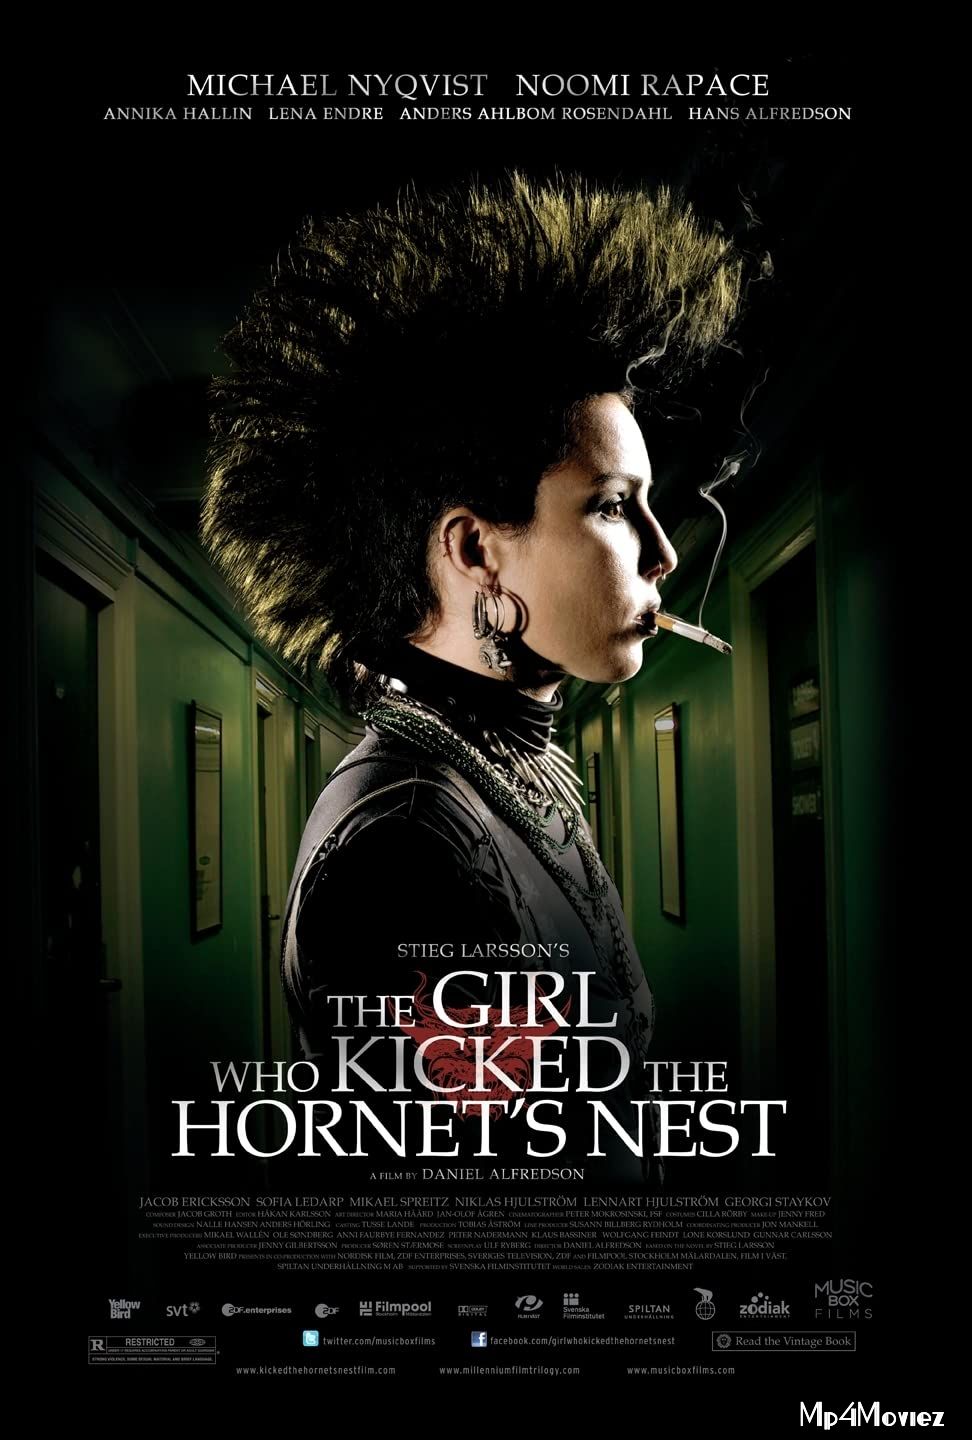 The Girl Who Kicked the Hornets Nest (2009) Hindi Dubbed BluRay download full movie